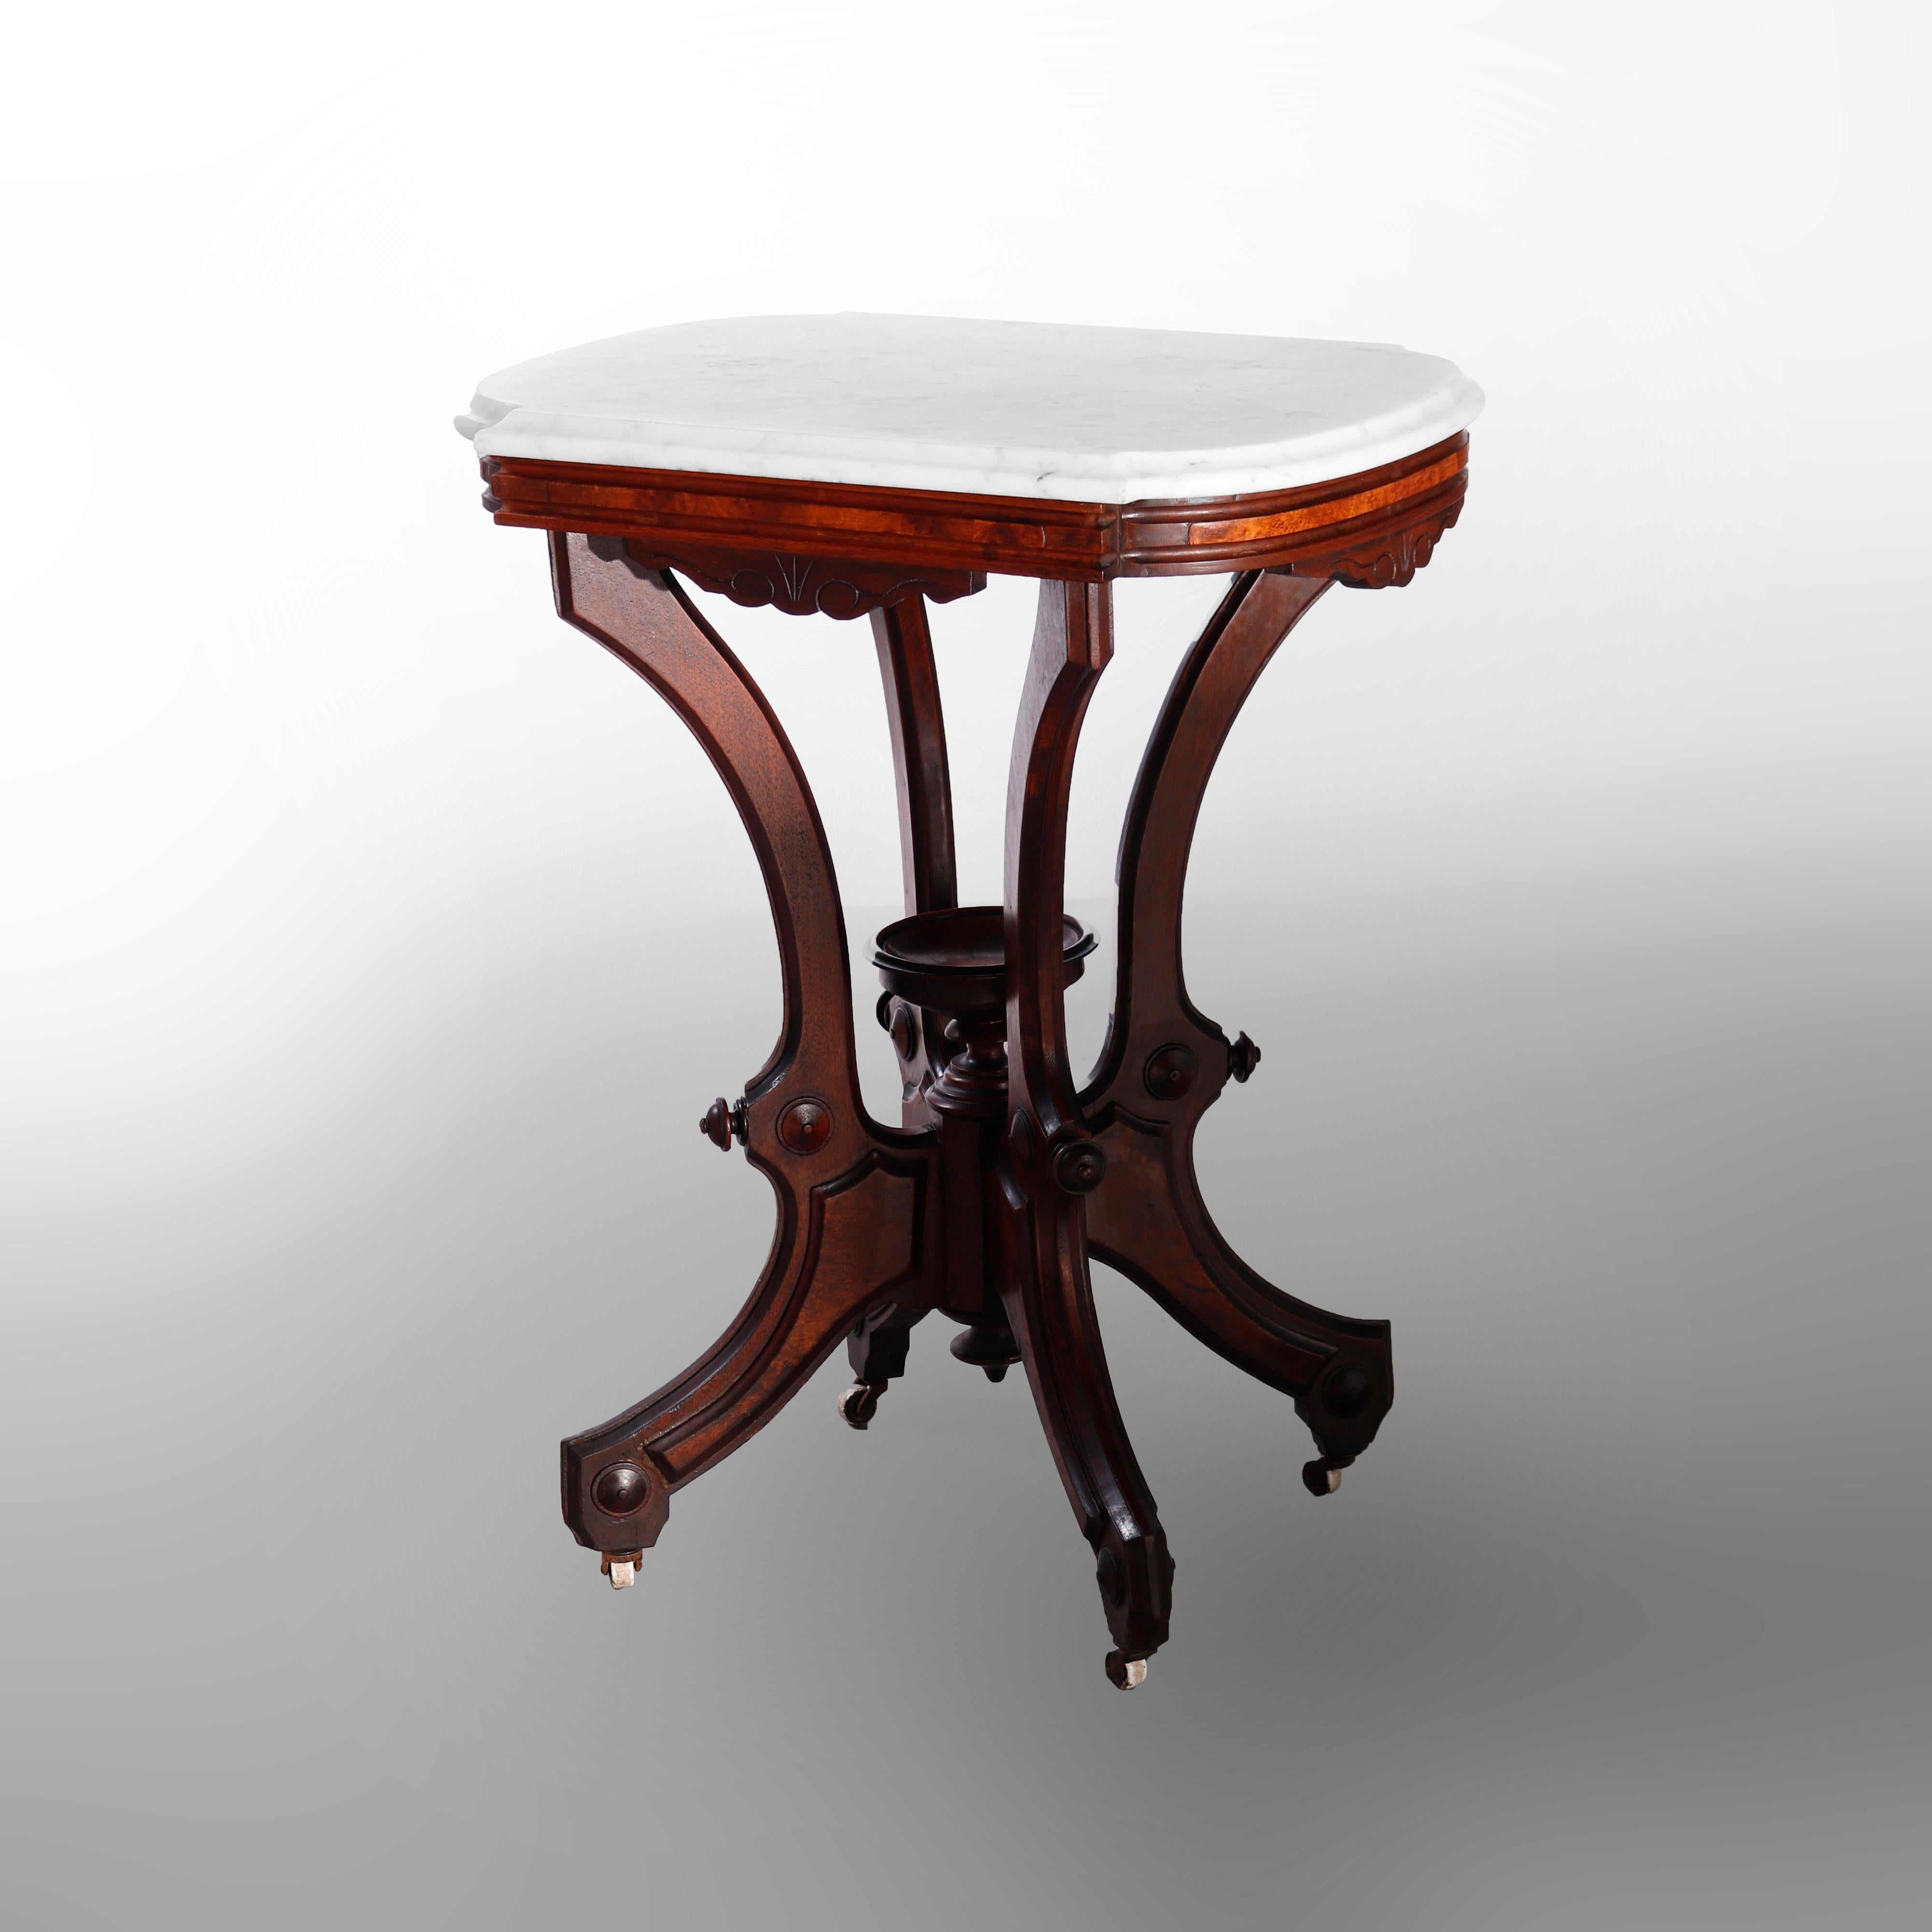 A Renaissance Revival parlor table offers shaped and beveled top over walnut and burl base raised on stylized scroll form legs with central urn form finial, c1890

Measures - 29.5''H x 23''W x 16.5''D.

Catalogue Note: Ask about DISCOUNTED DELIVERY